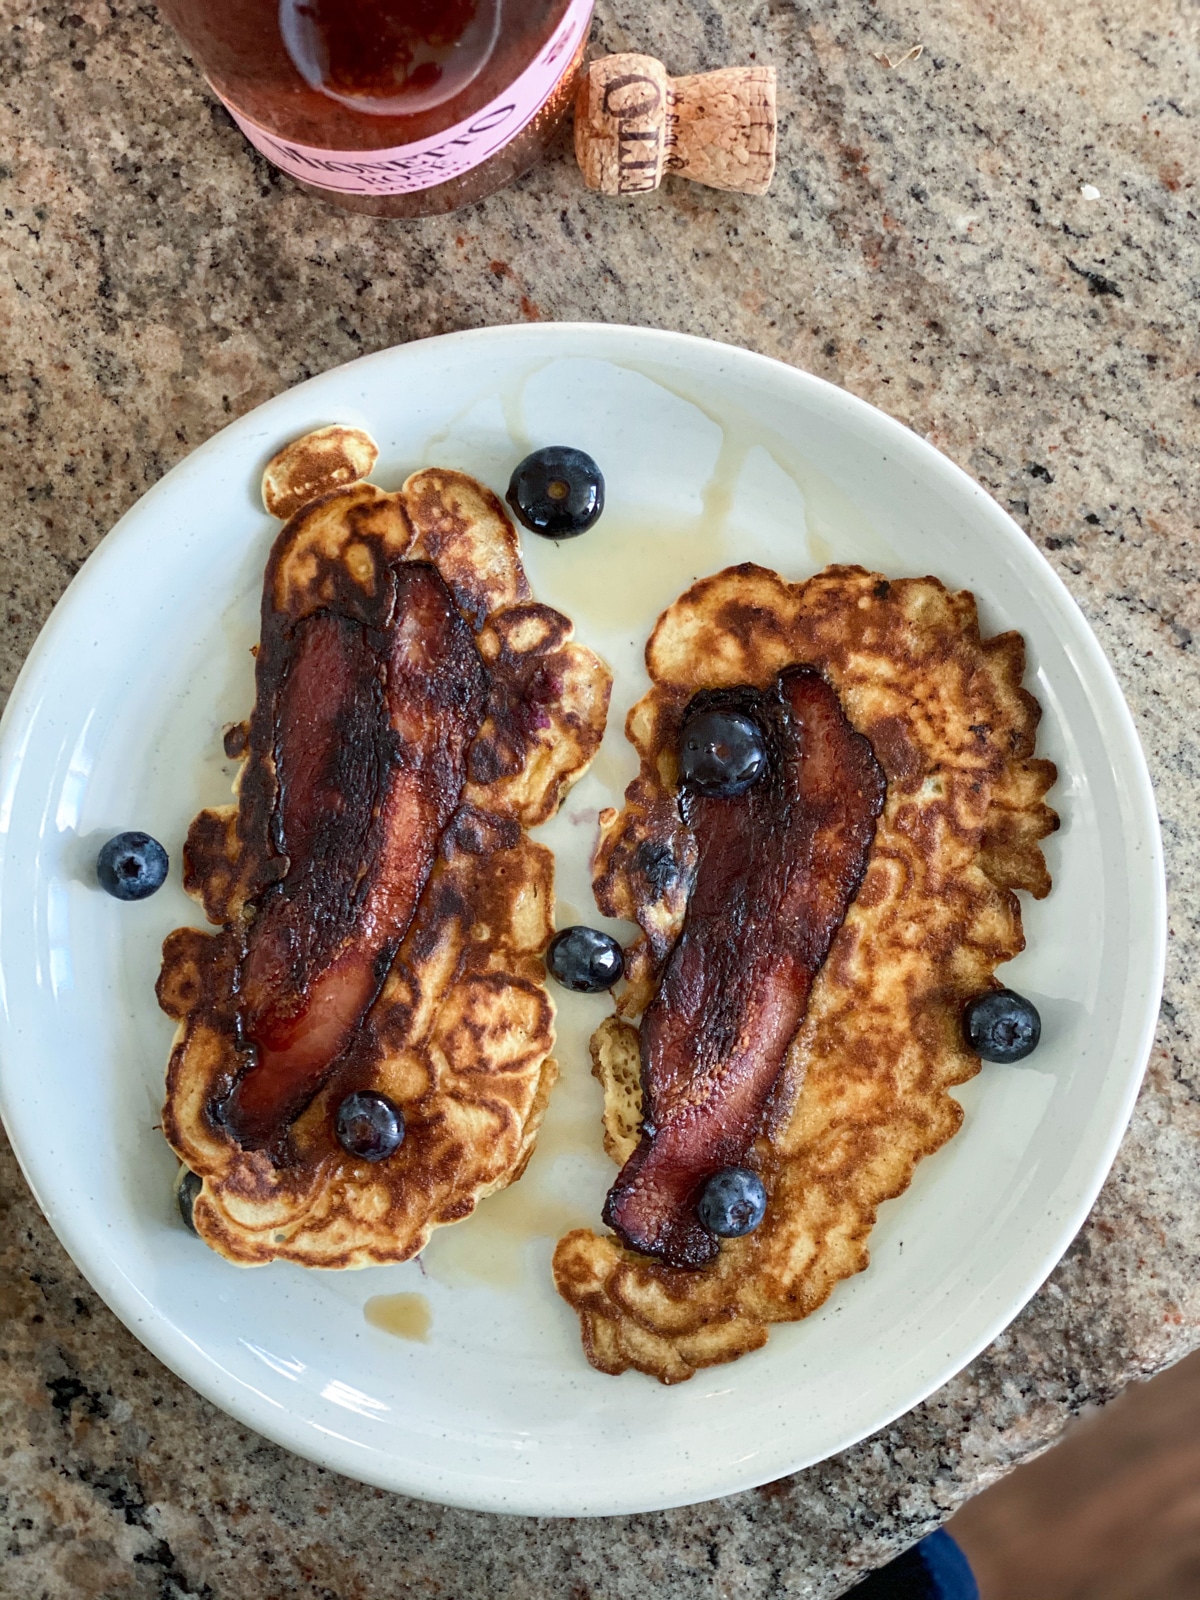 bacon pancakes with blueberries from a costco haul